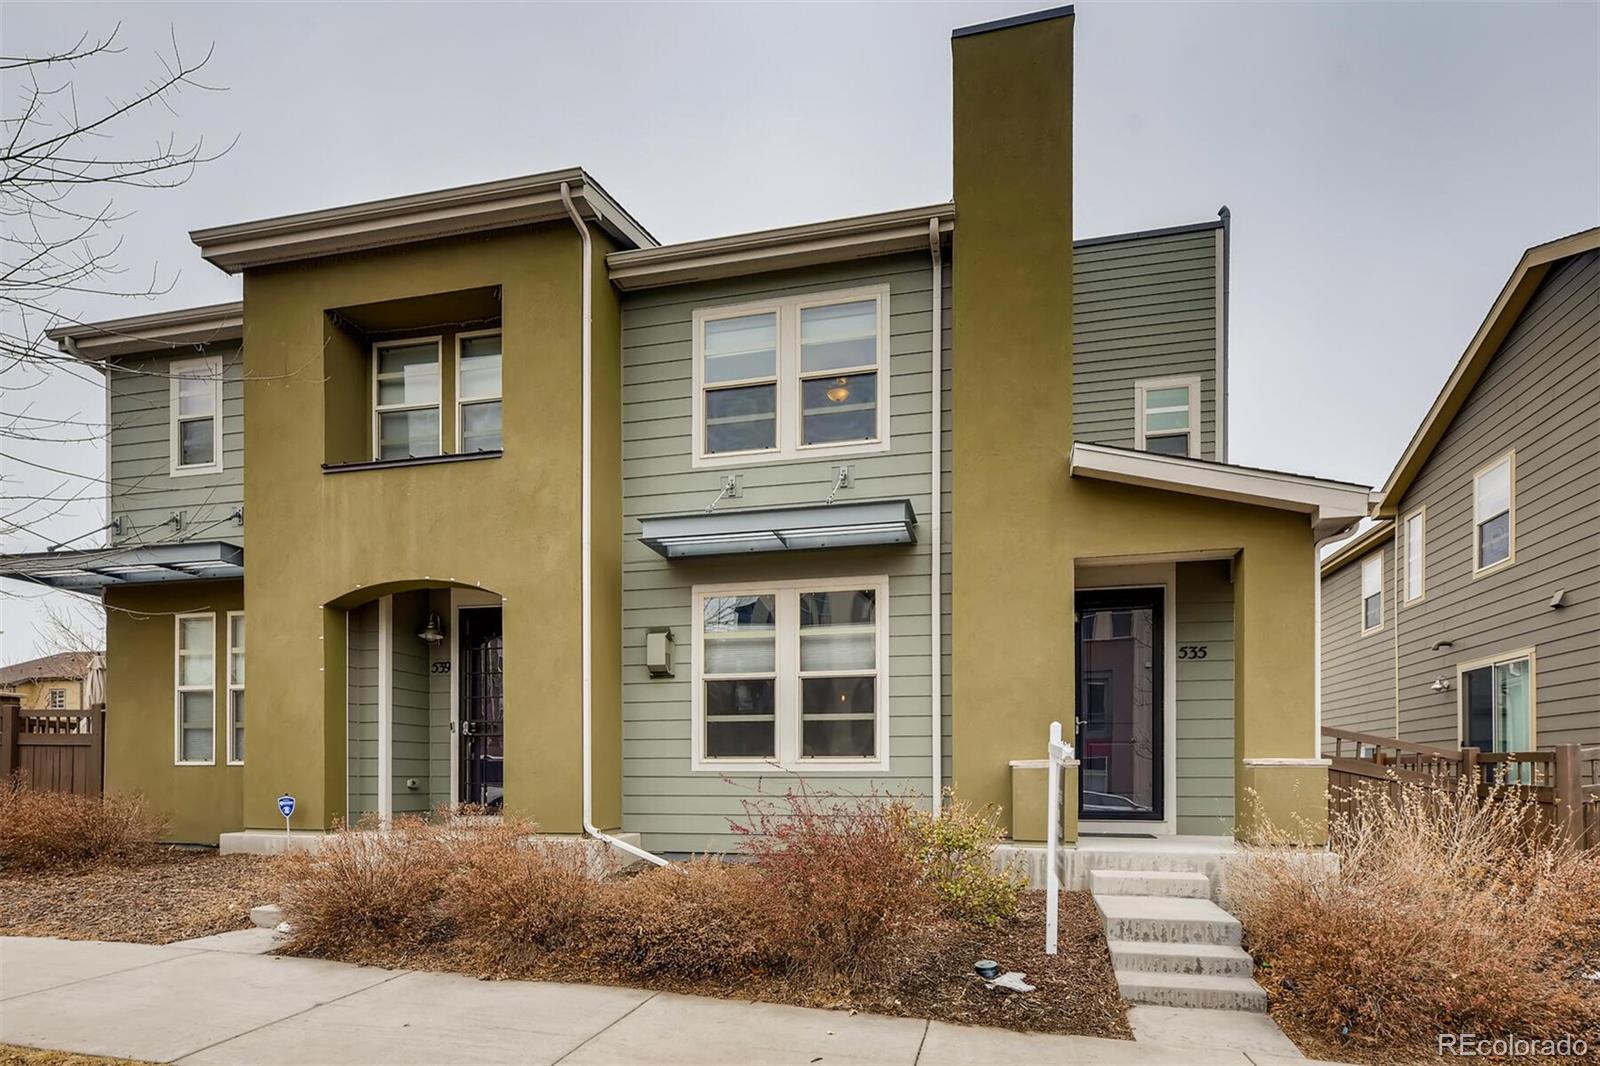 Report Image for 535 S Upham Street,Lakewood, Colorado